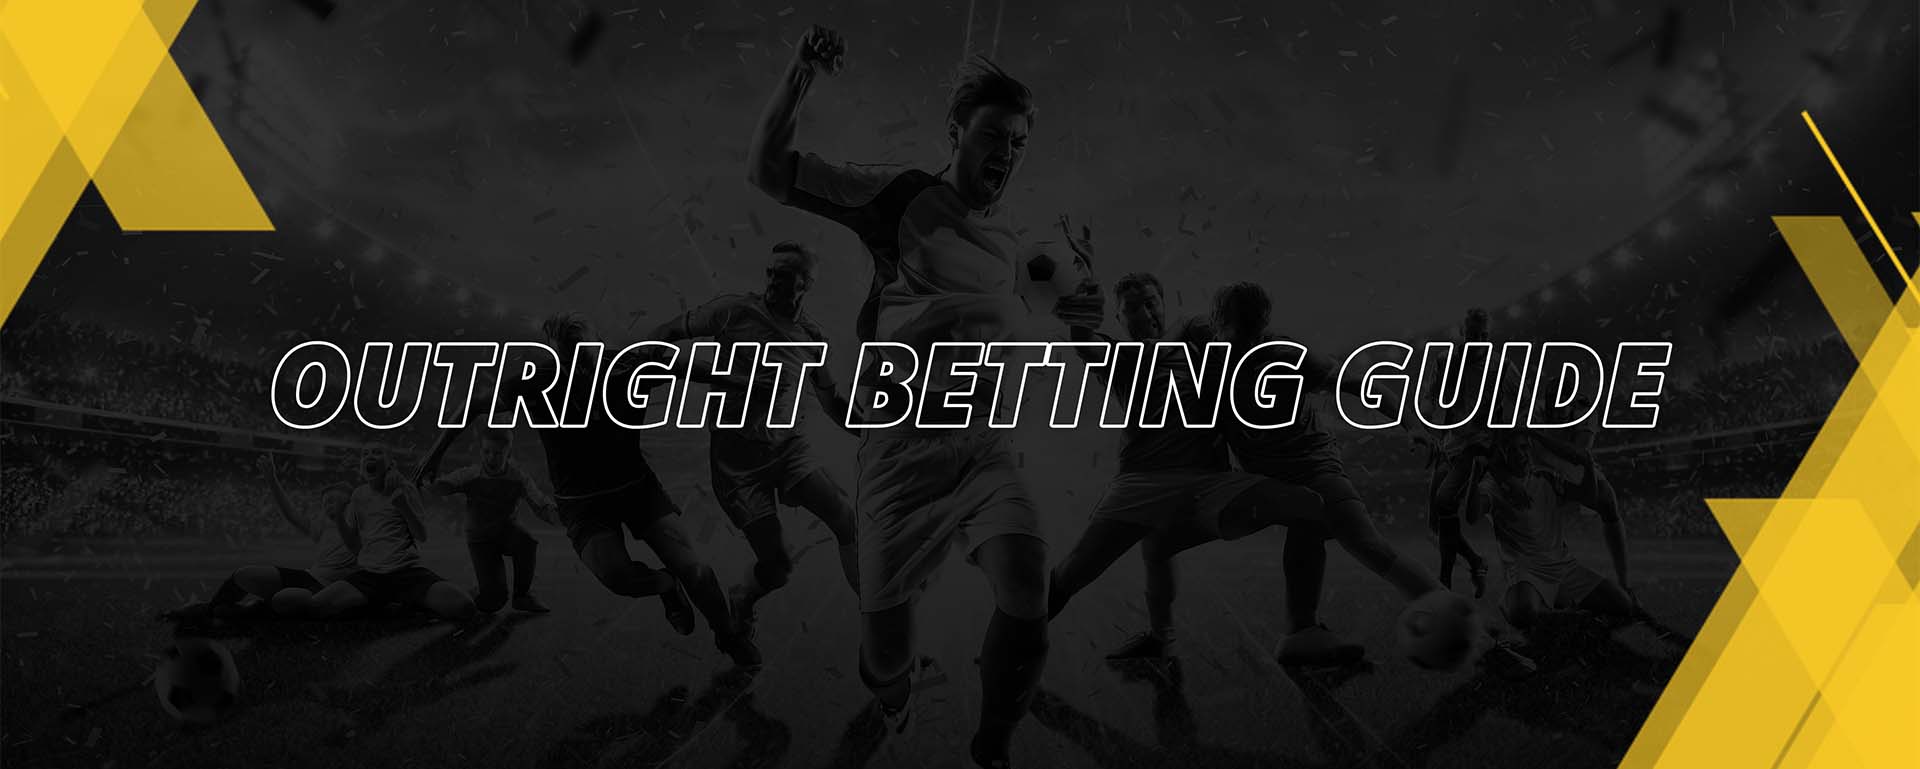 OUTRIGHT BETTING GUIDE